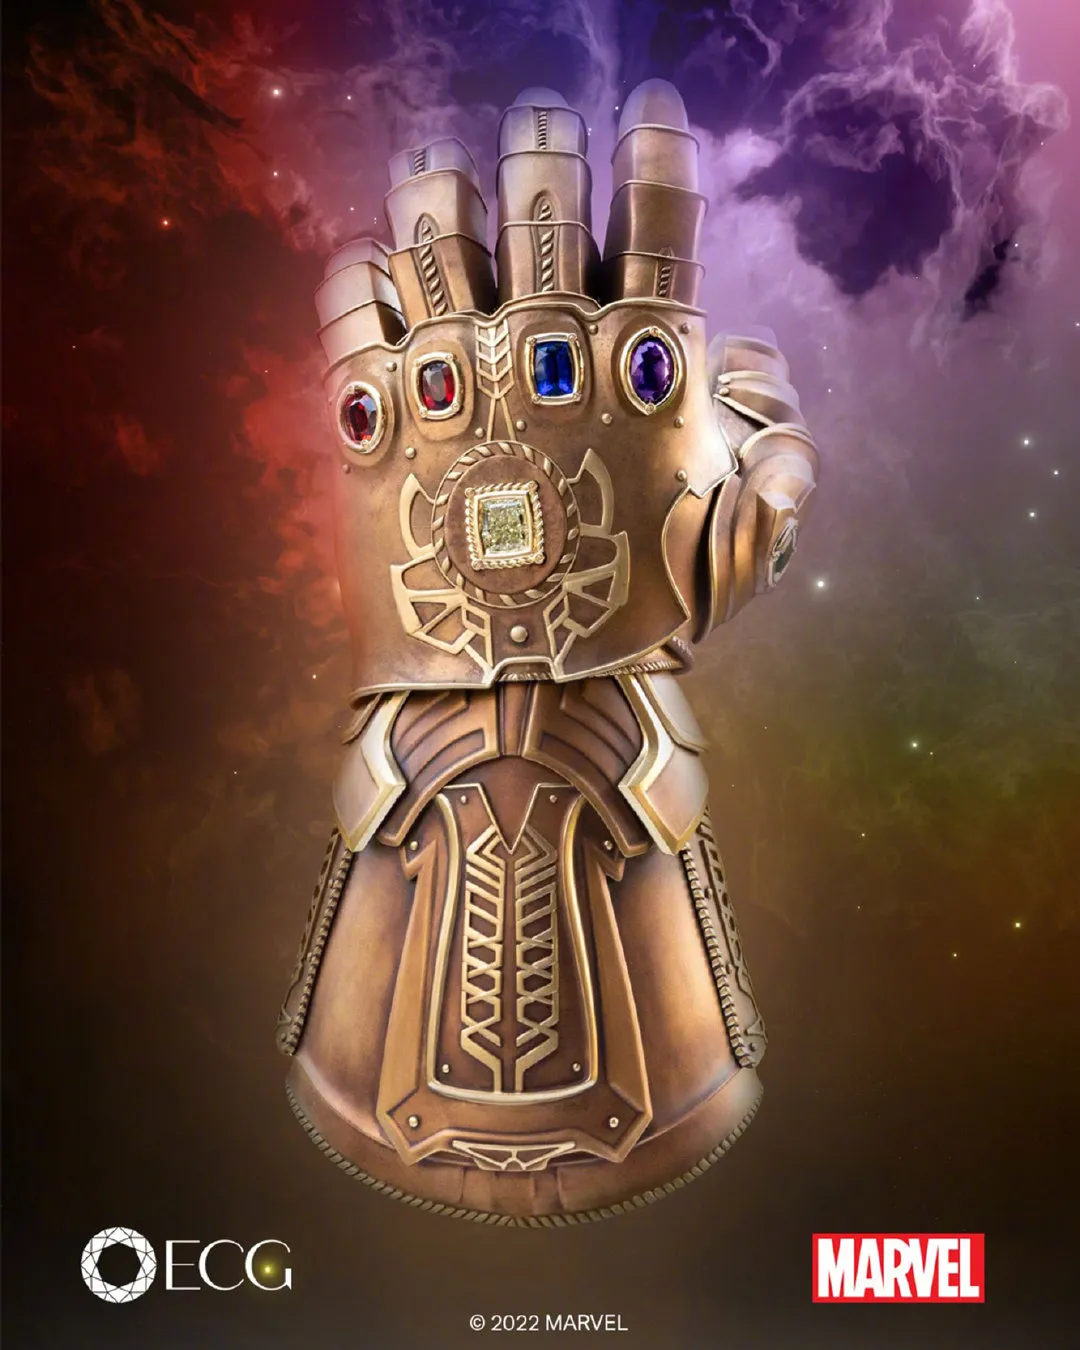 Marvel's Infinity Gauntlet at 2022 SDCC is worth $25 million | FMV6